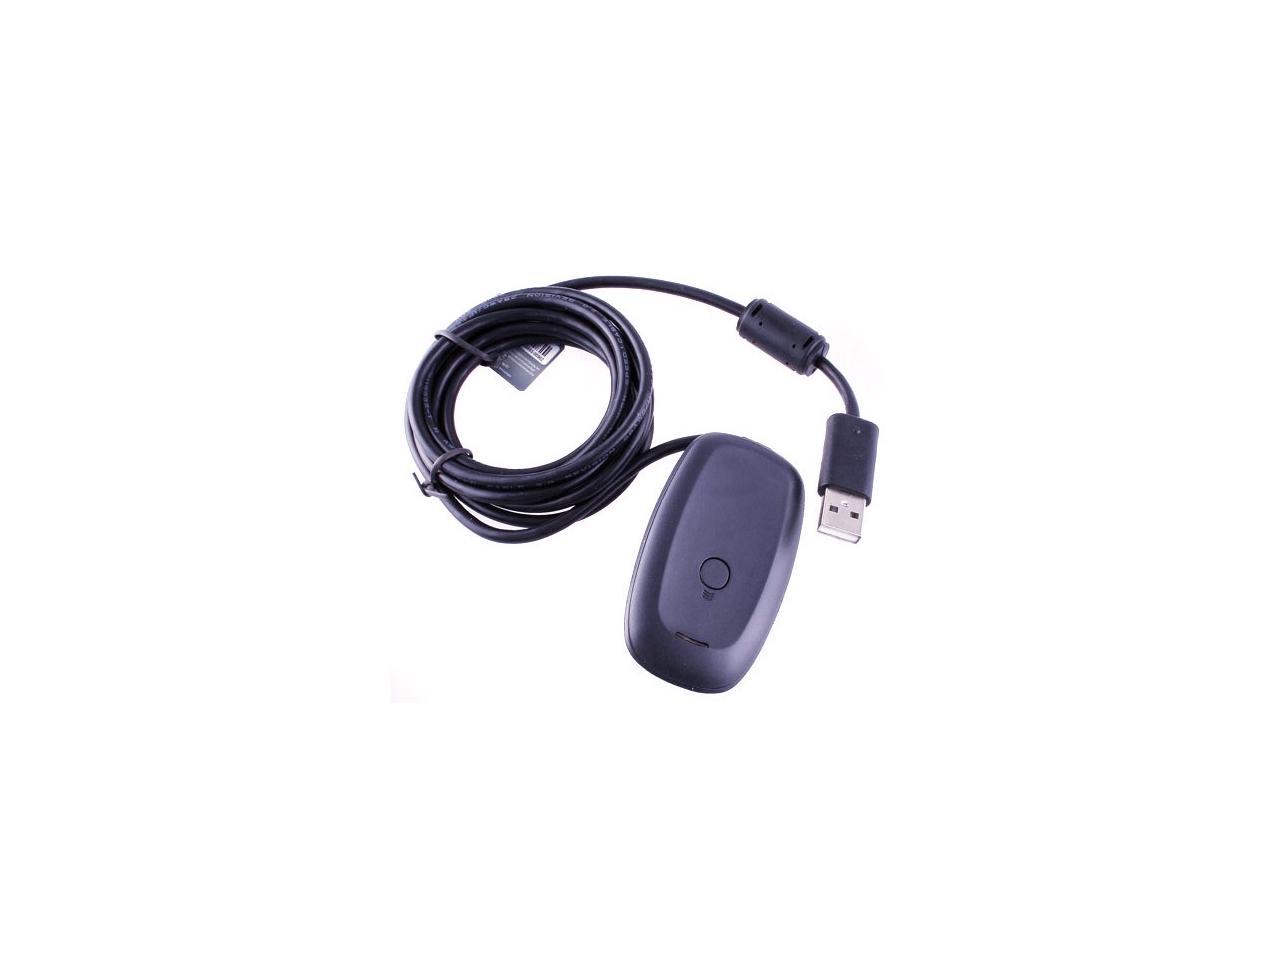 Black Pc Wireless Controller Gaming Receiver Adapter For Microsoft Xbox 360 Newegg Com